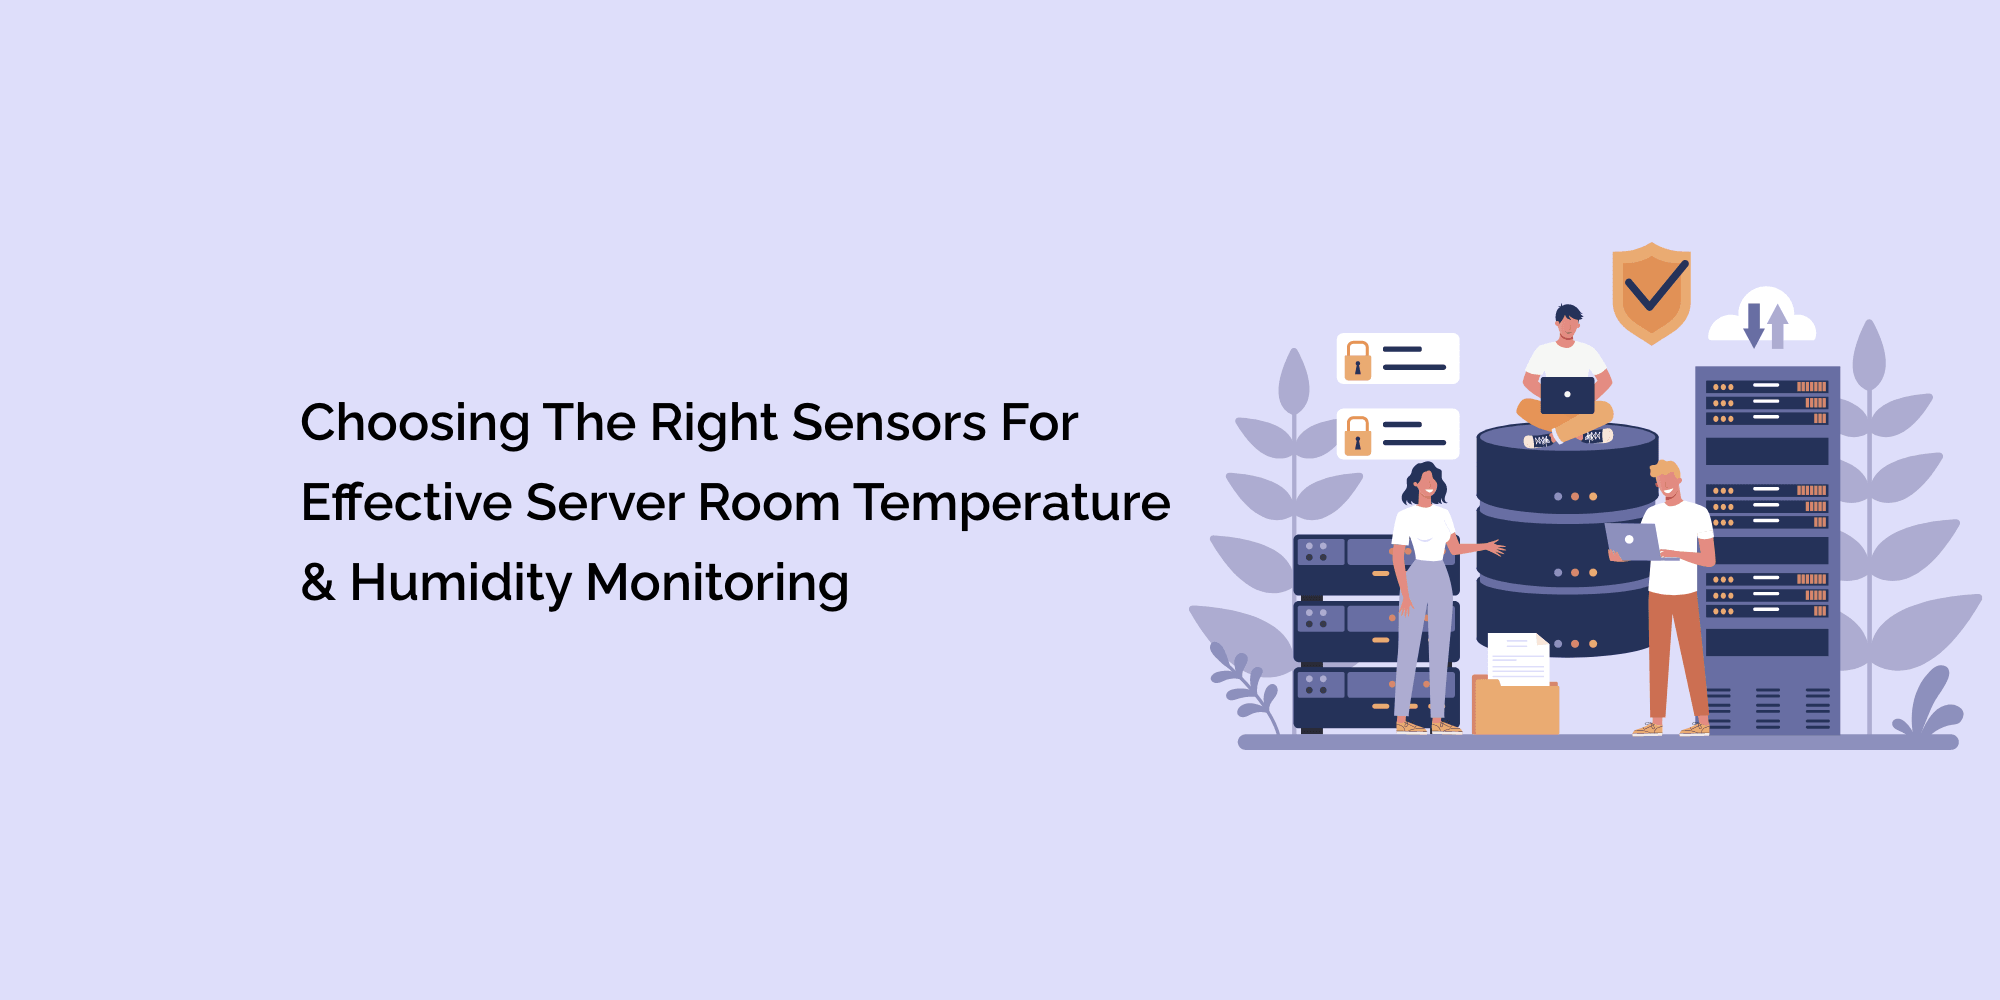 Choosing the Right Sensors for Effective Server Room Temperature & Humidity Monitoring